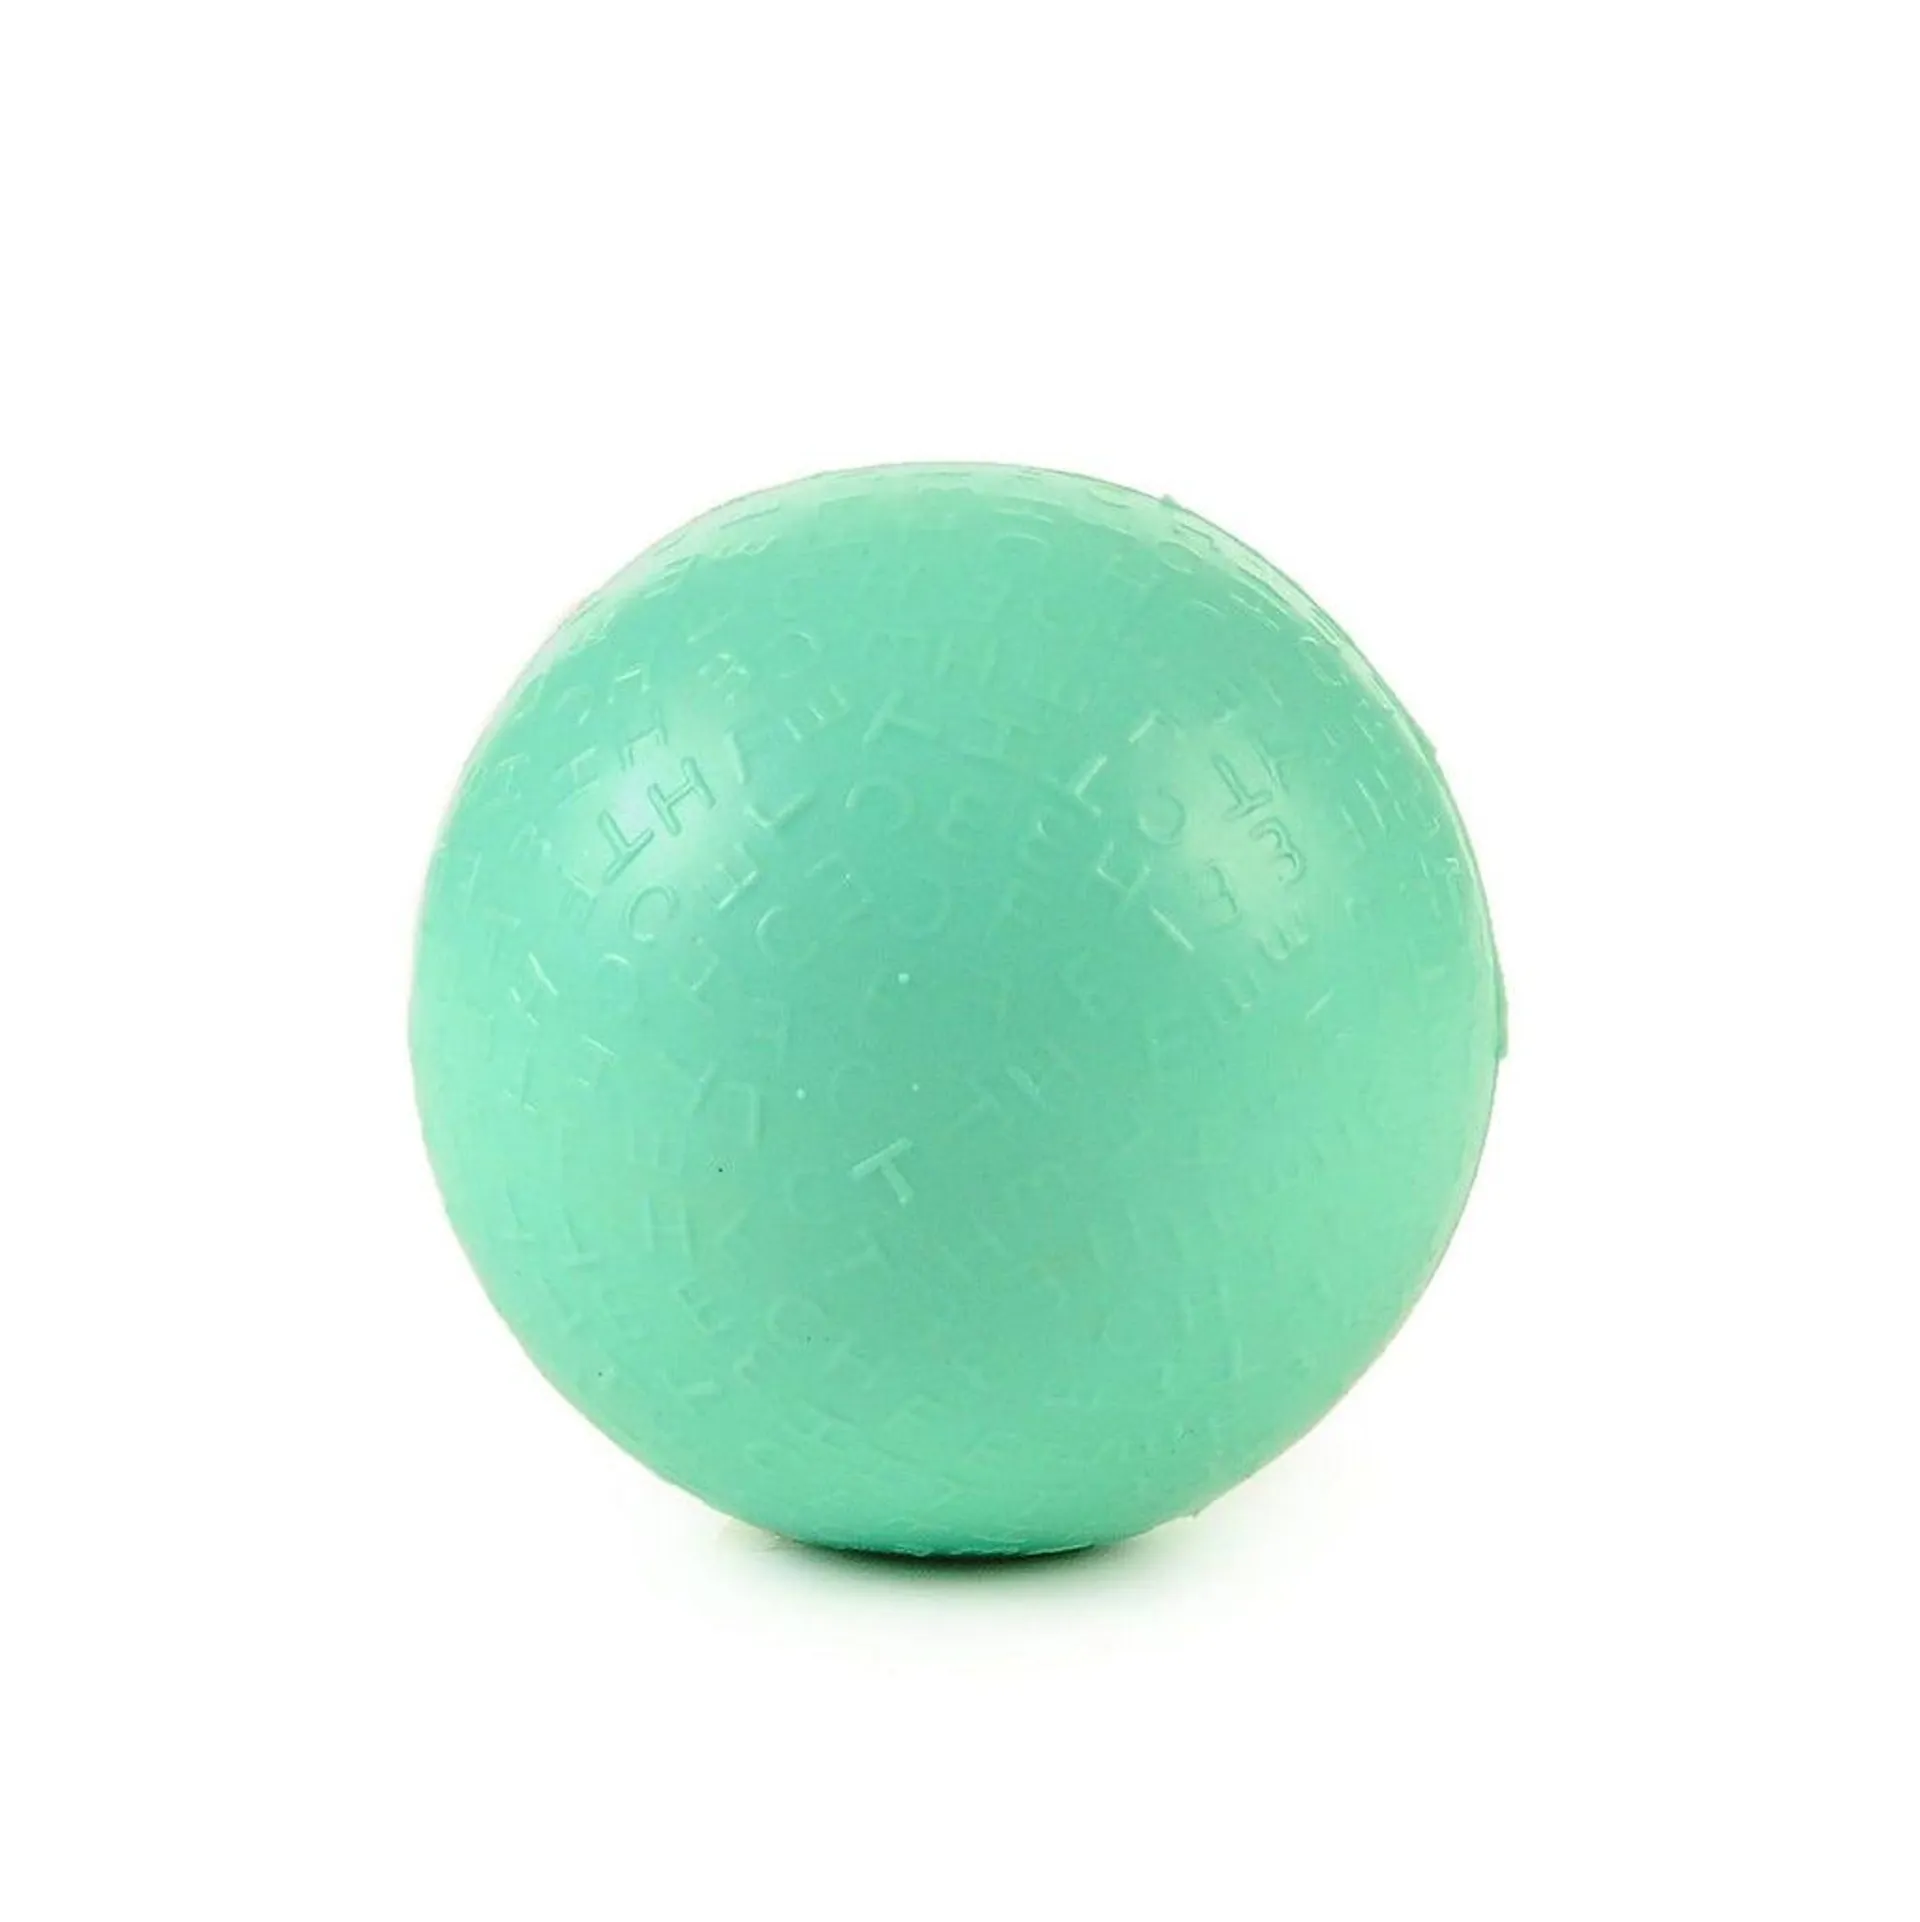 Fetch Ball in Turquoise